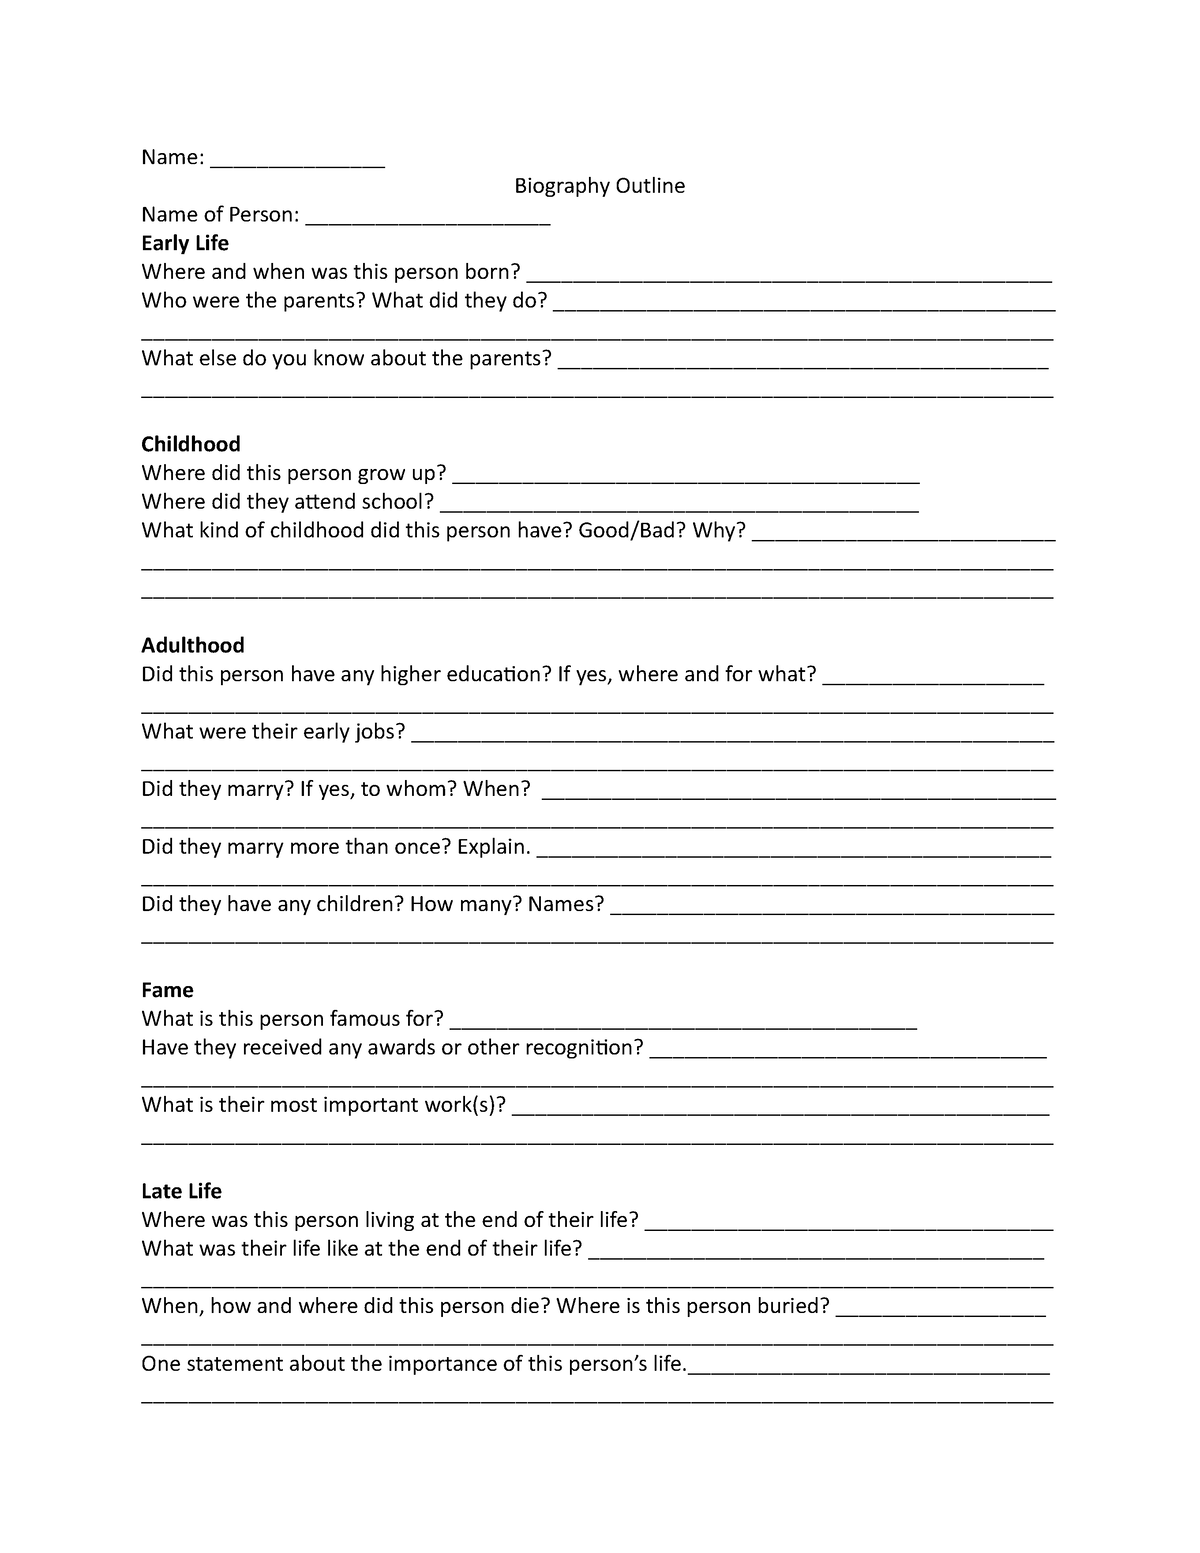 biography outline middle school